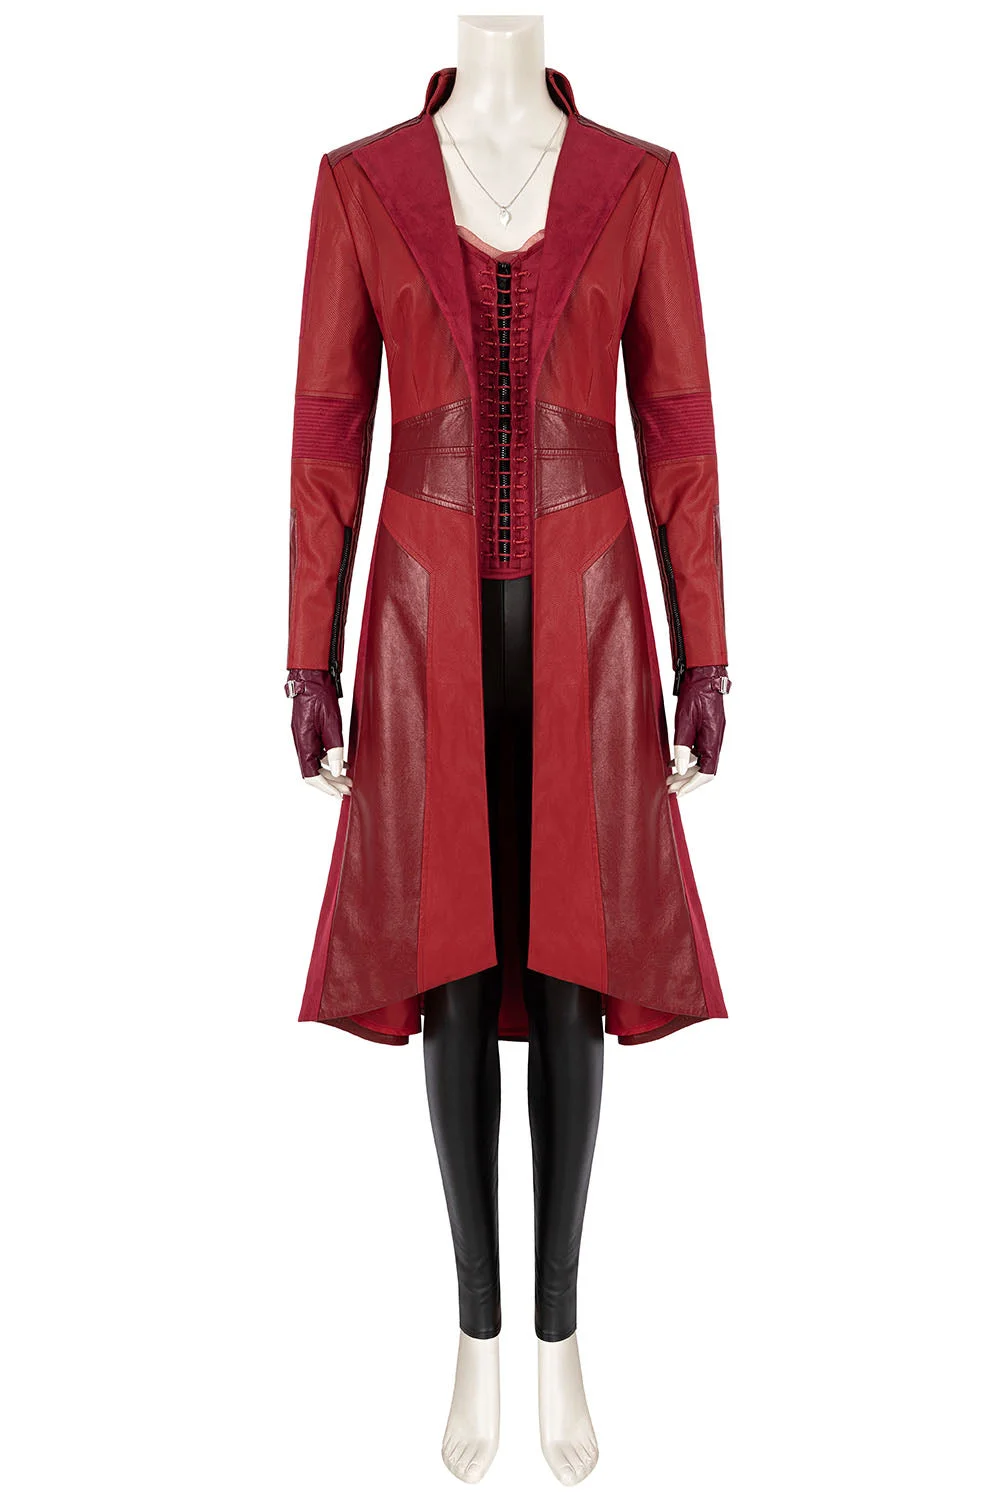 Scarlet Witch Wanda Cosplay Costume Avengers Endgame Edition